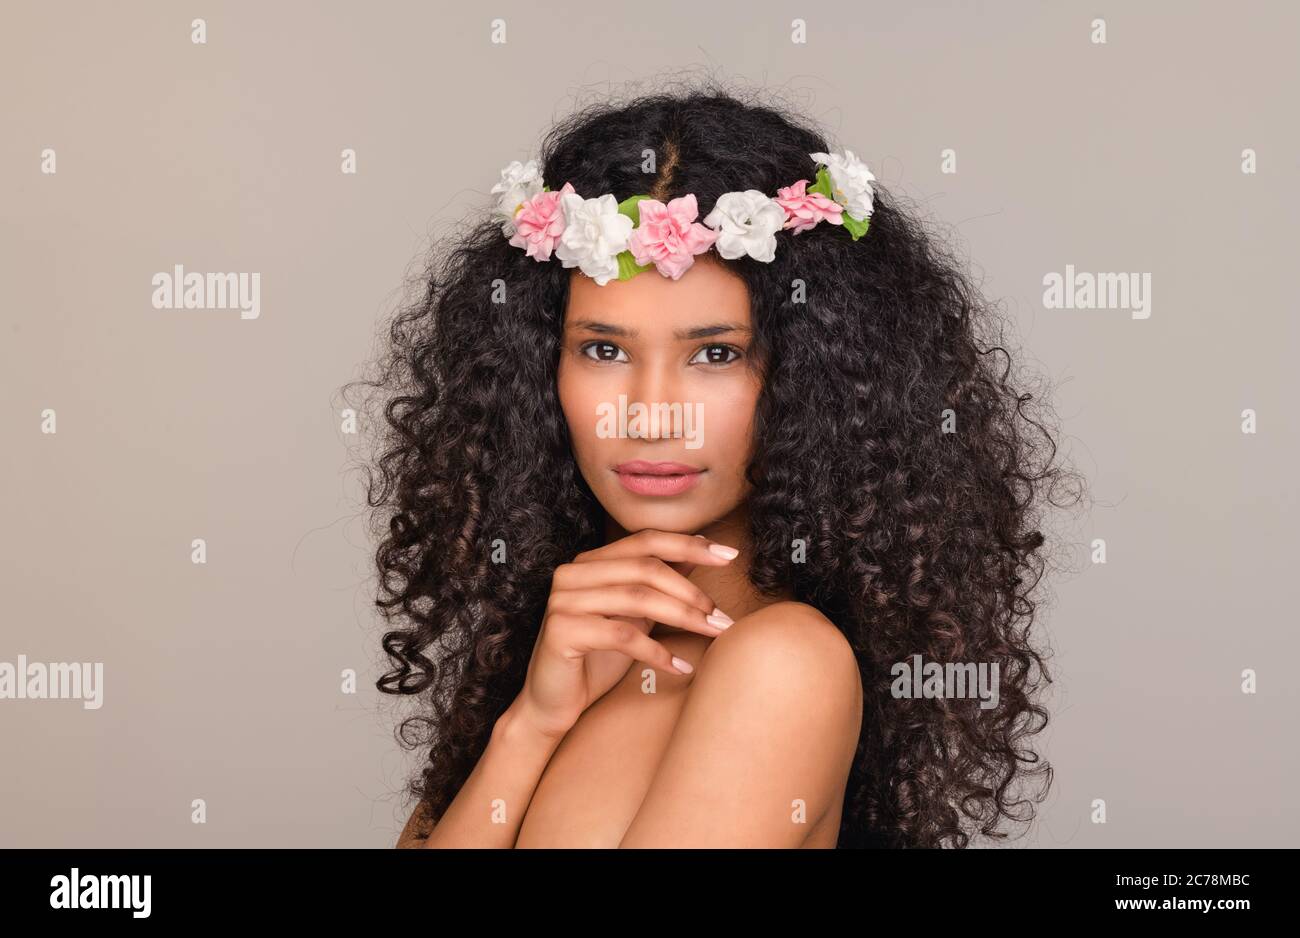 Santo Domingo Girl In Her Early Twenties Wearing A Chaplet Of Pink And White Flowers On Her Thick Curly Black Hair As She Looks At The Camera With Han Stock Photo